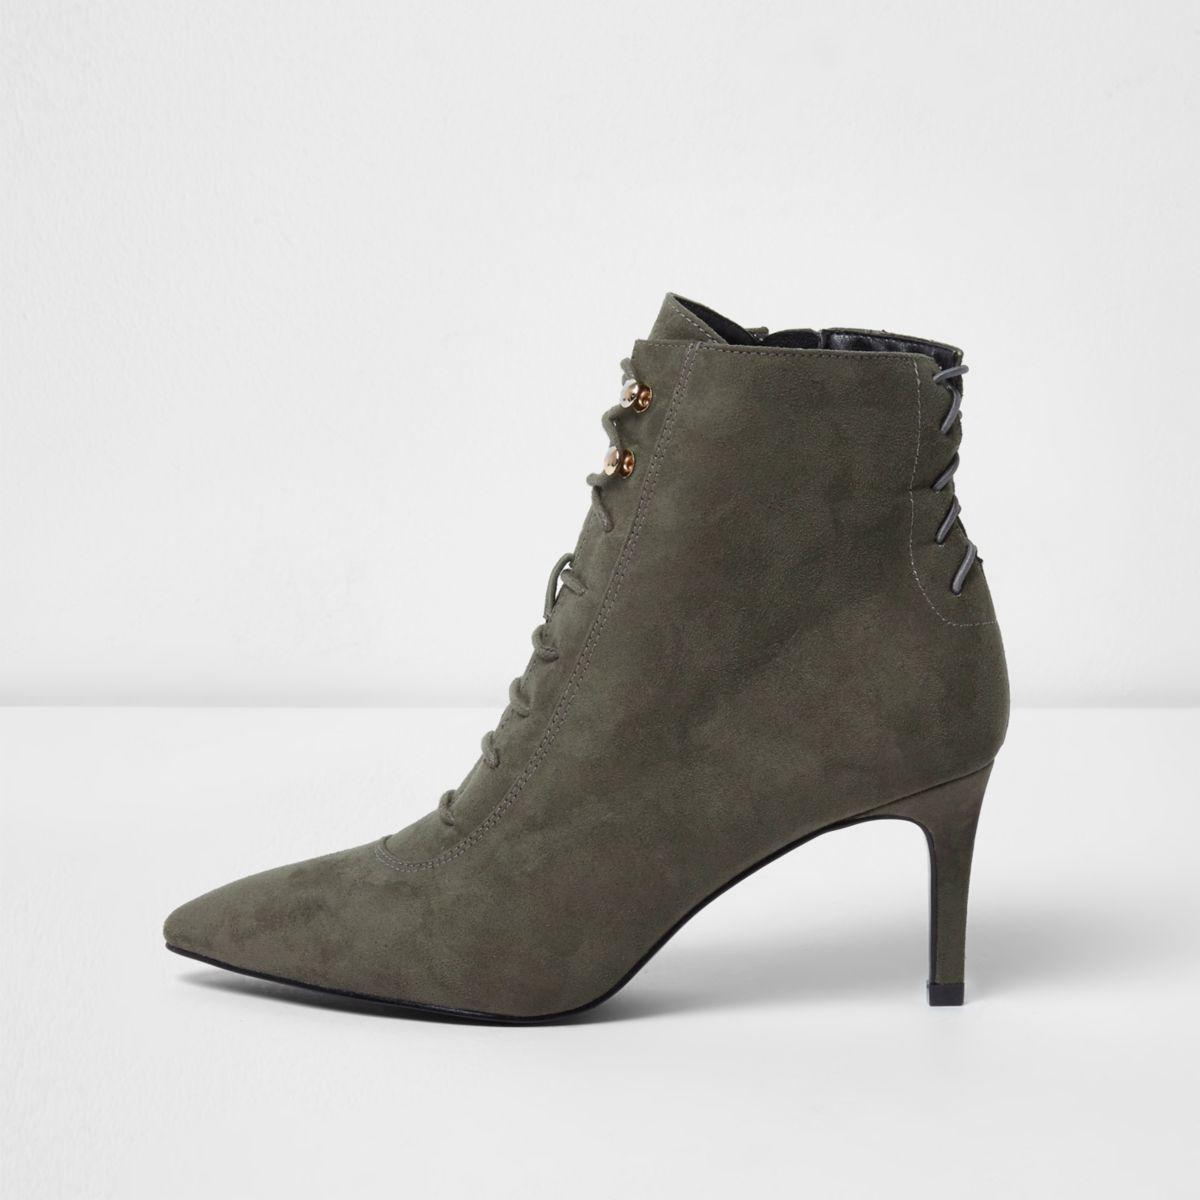 River Island Grey Grey Pointed Lace Up Kitten Heel Ankle Boots Grey Pointed Lace Up Kitten Heel Ankle Boots 